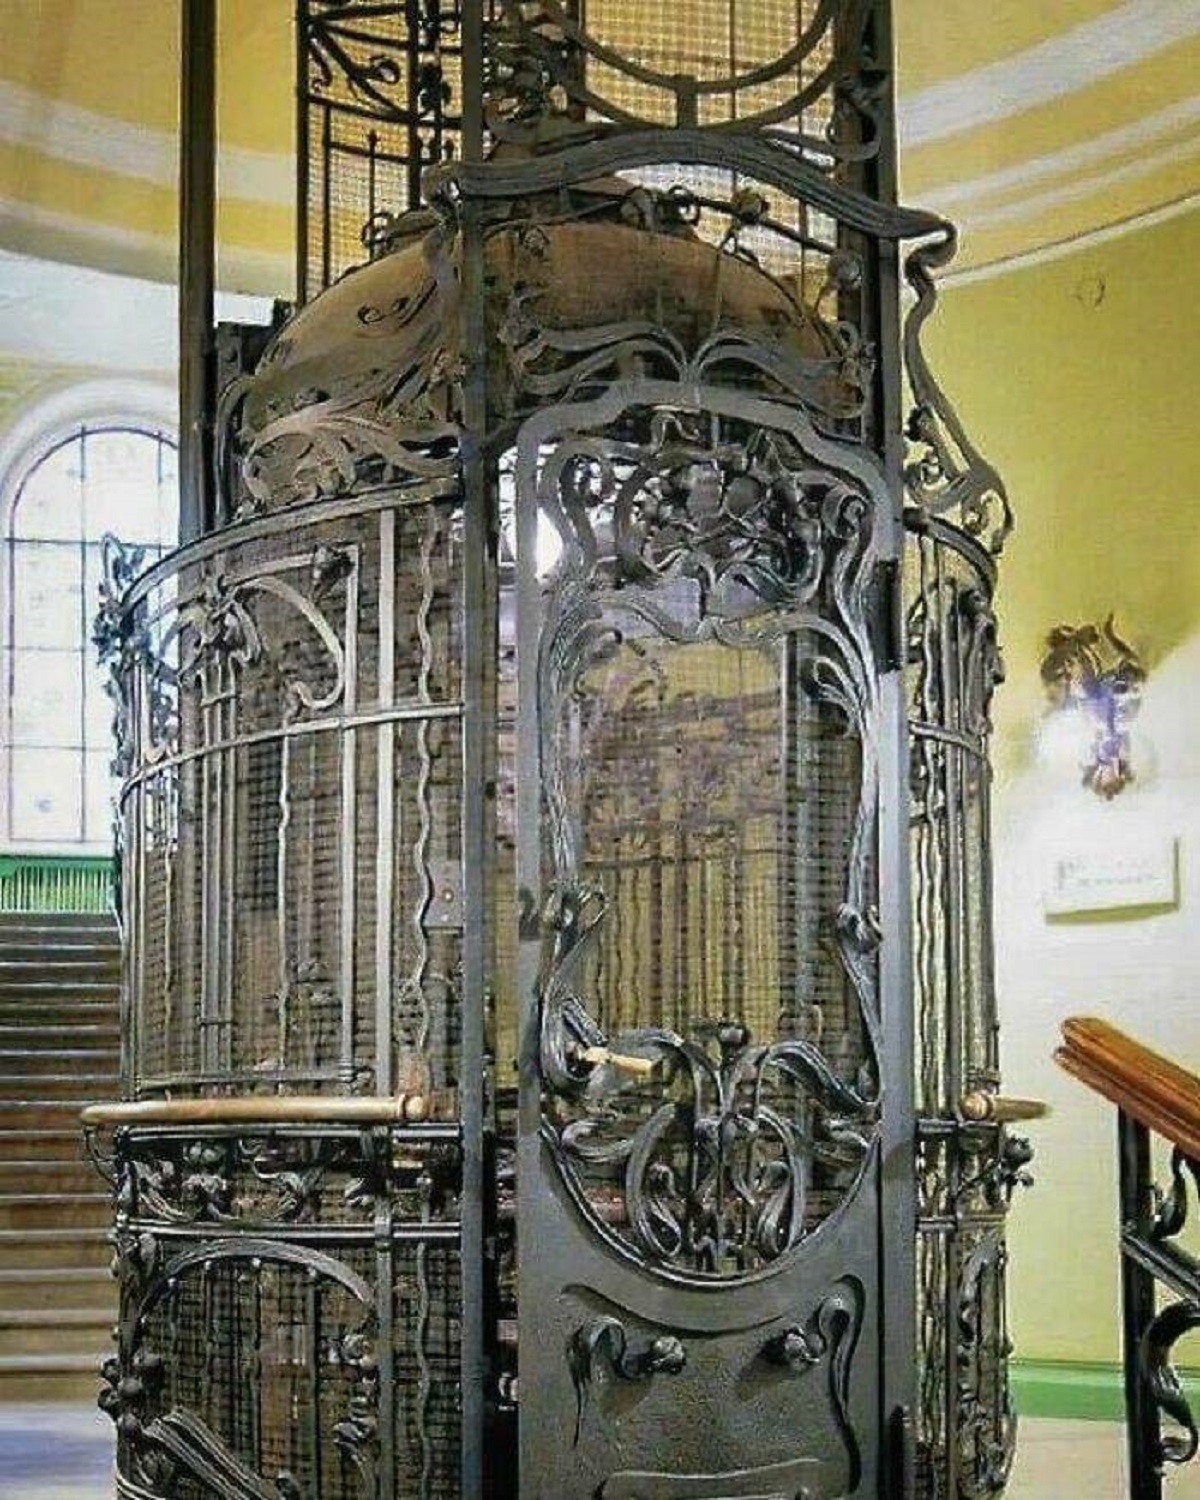 "A Steam-Powered Elevator In The House Of Guard Captain S. Muyaki In St. Petersburg, Russia. Circa 1902-1903"